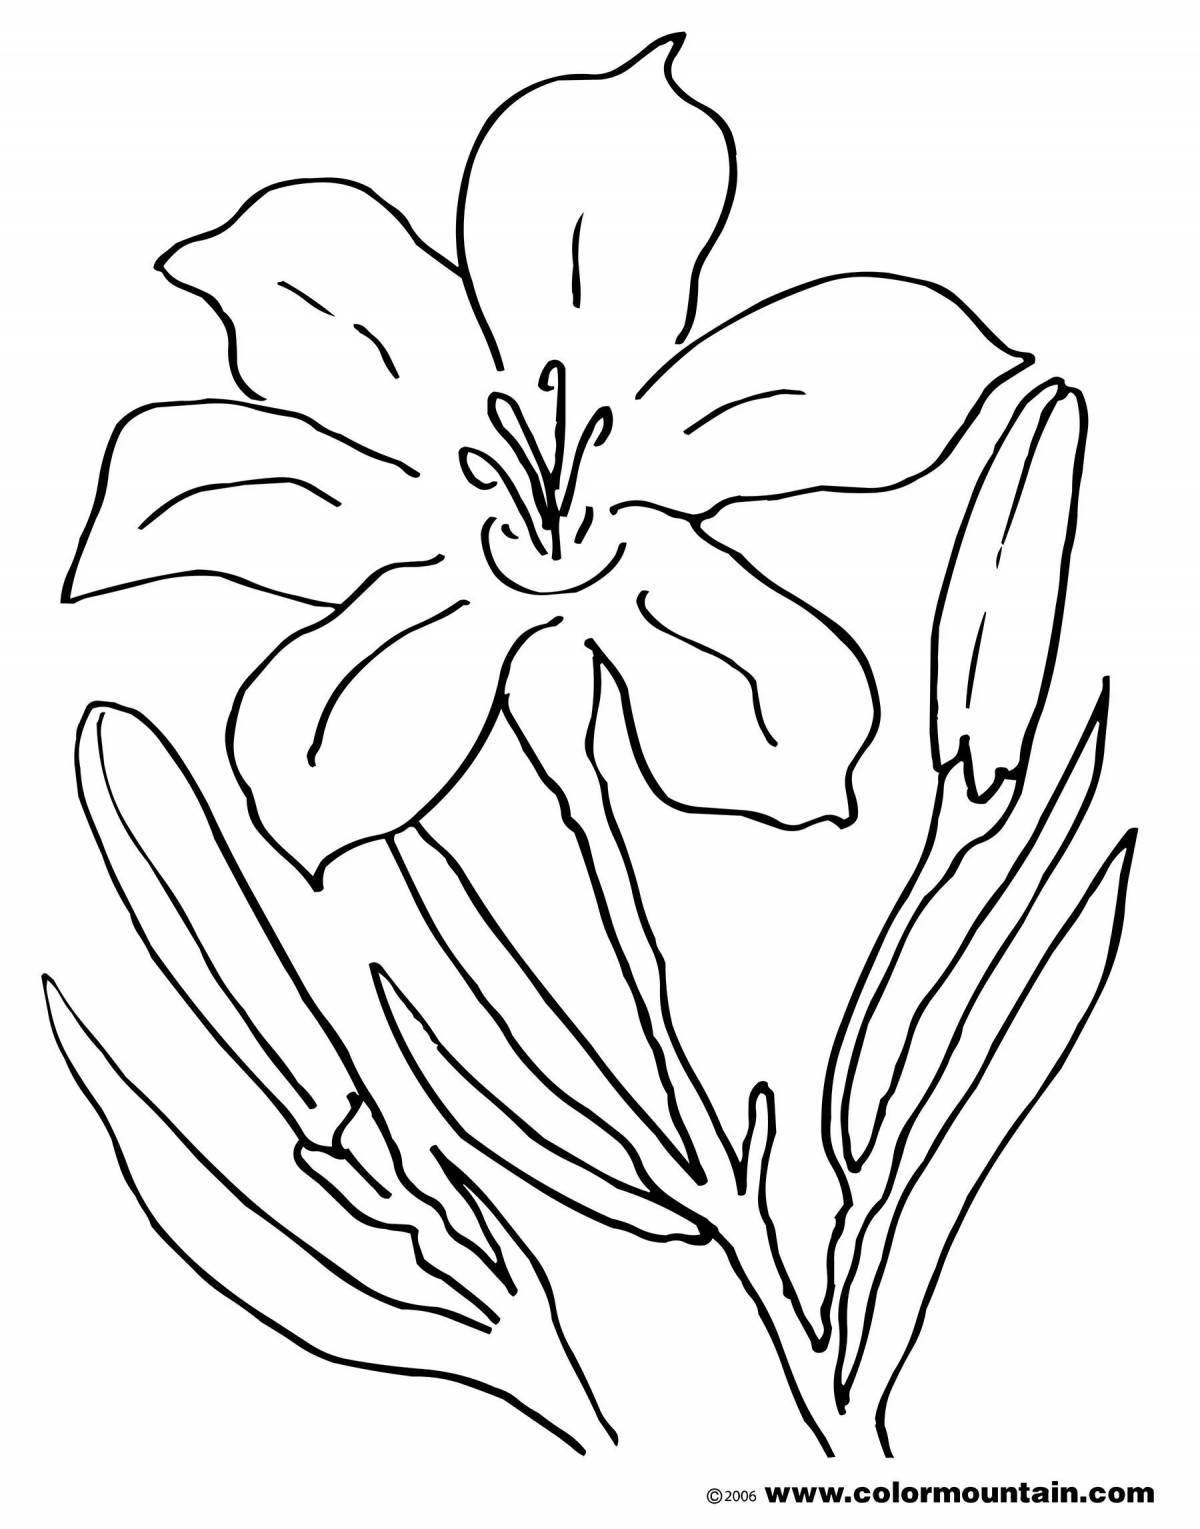 Coloring sun lily for children